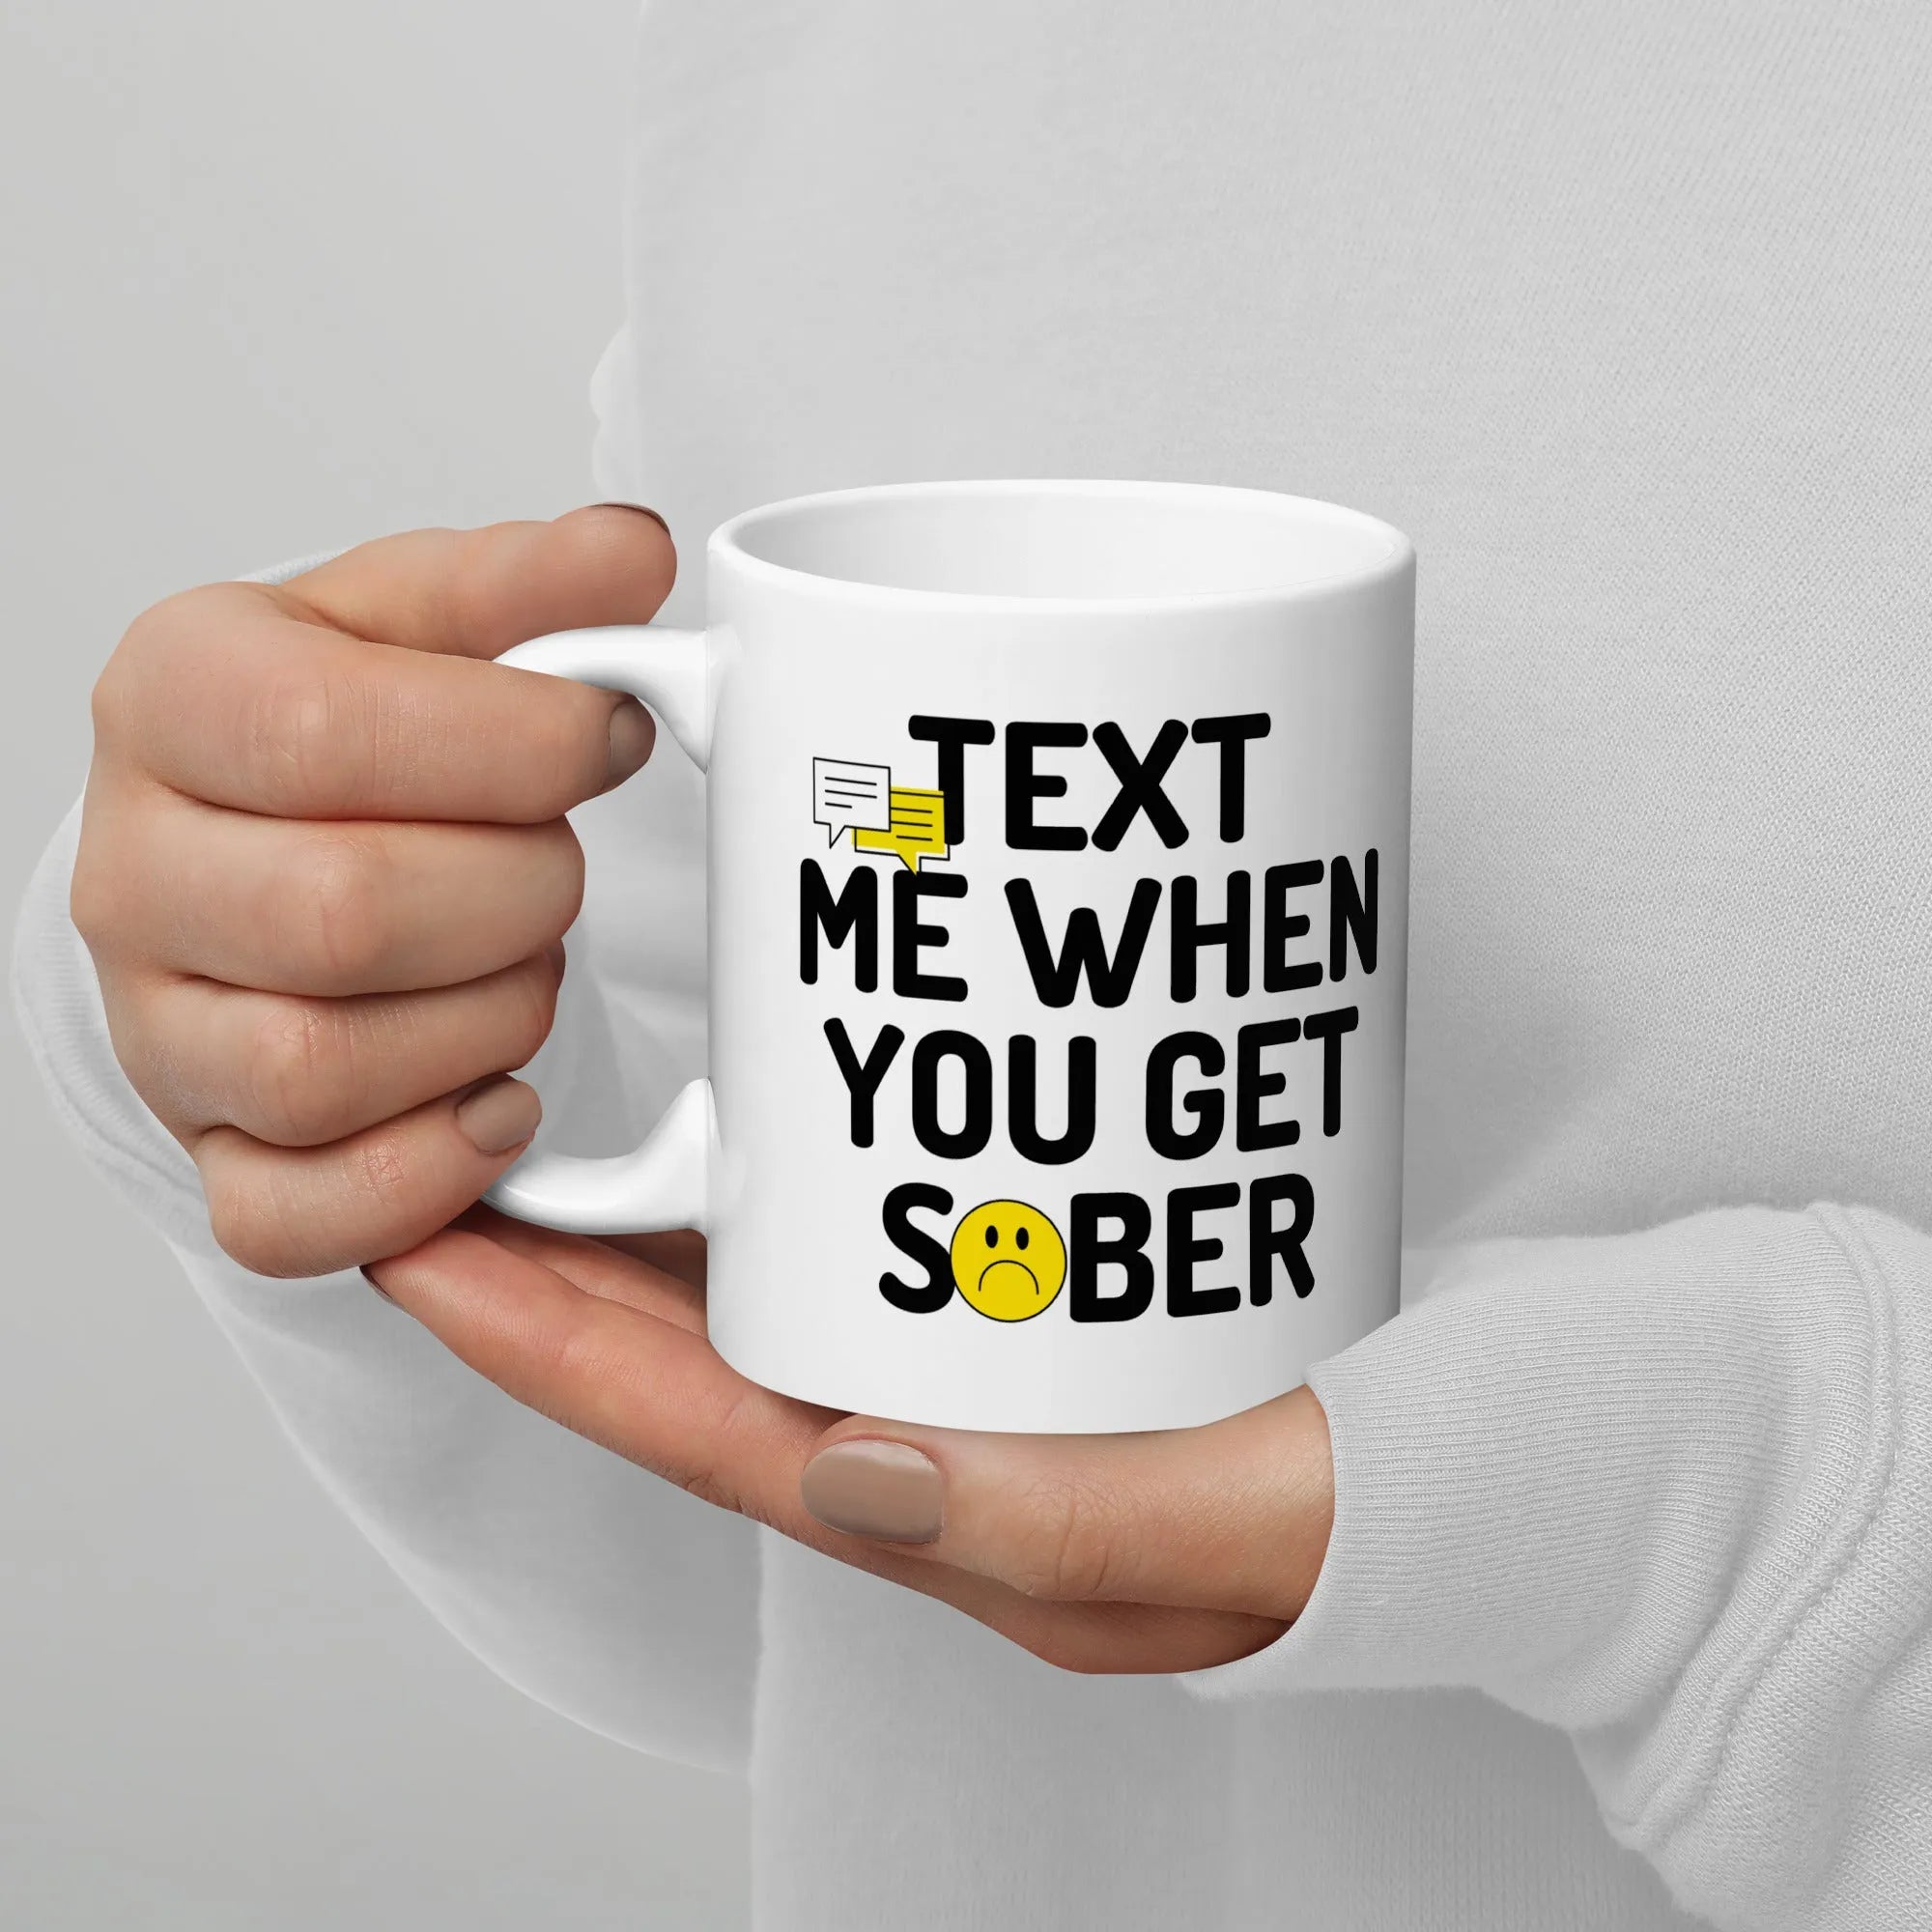 Text Me When You Get Sober - White glossy mug - Sobervation